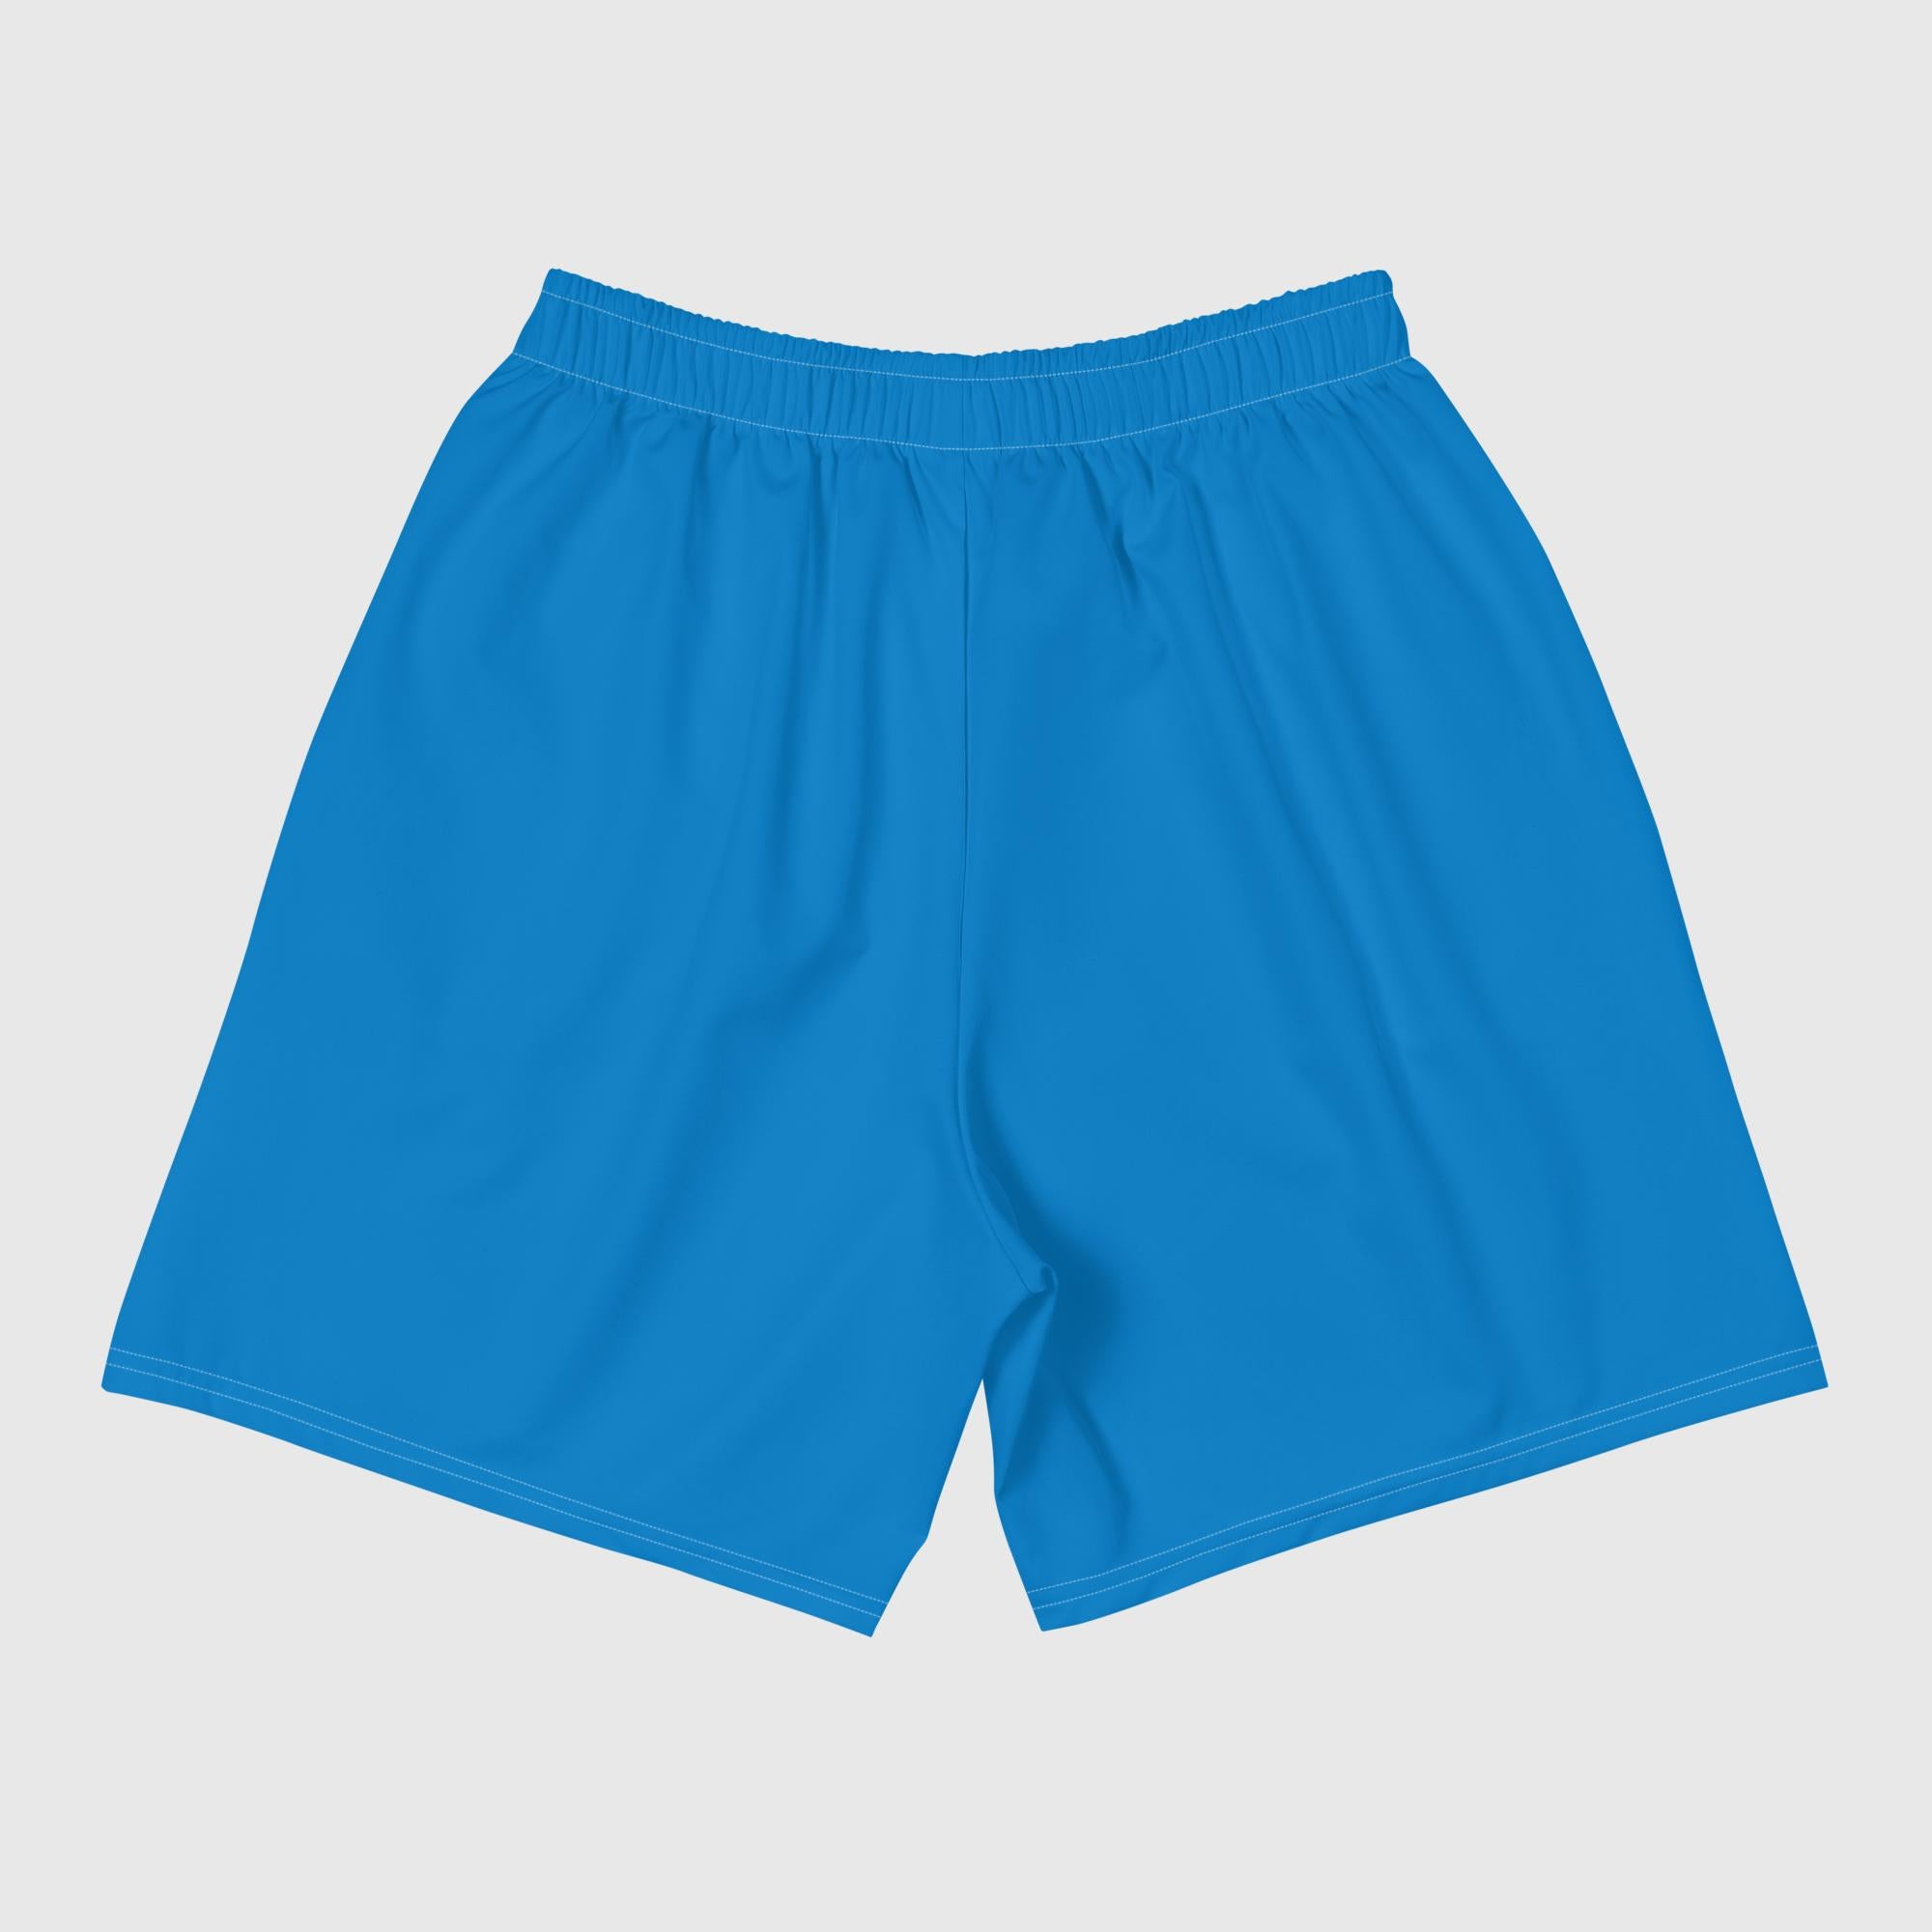 Men's Recycled Athletic Shorts - Blue